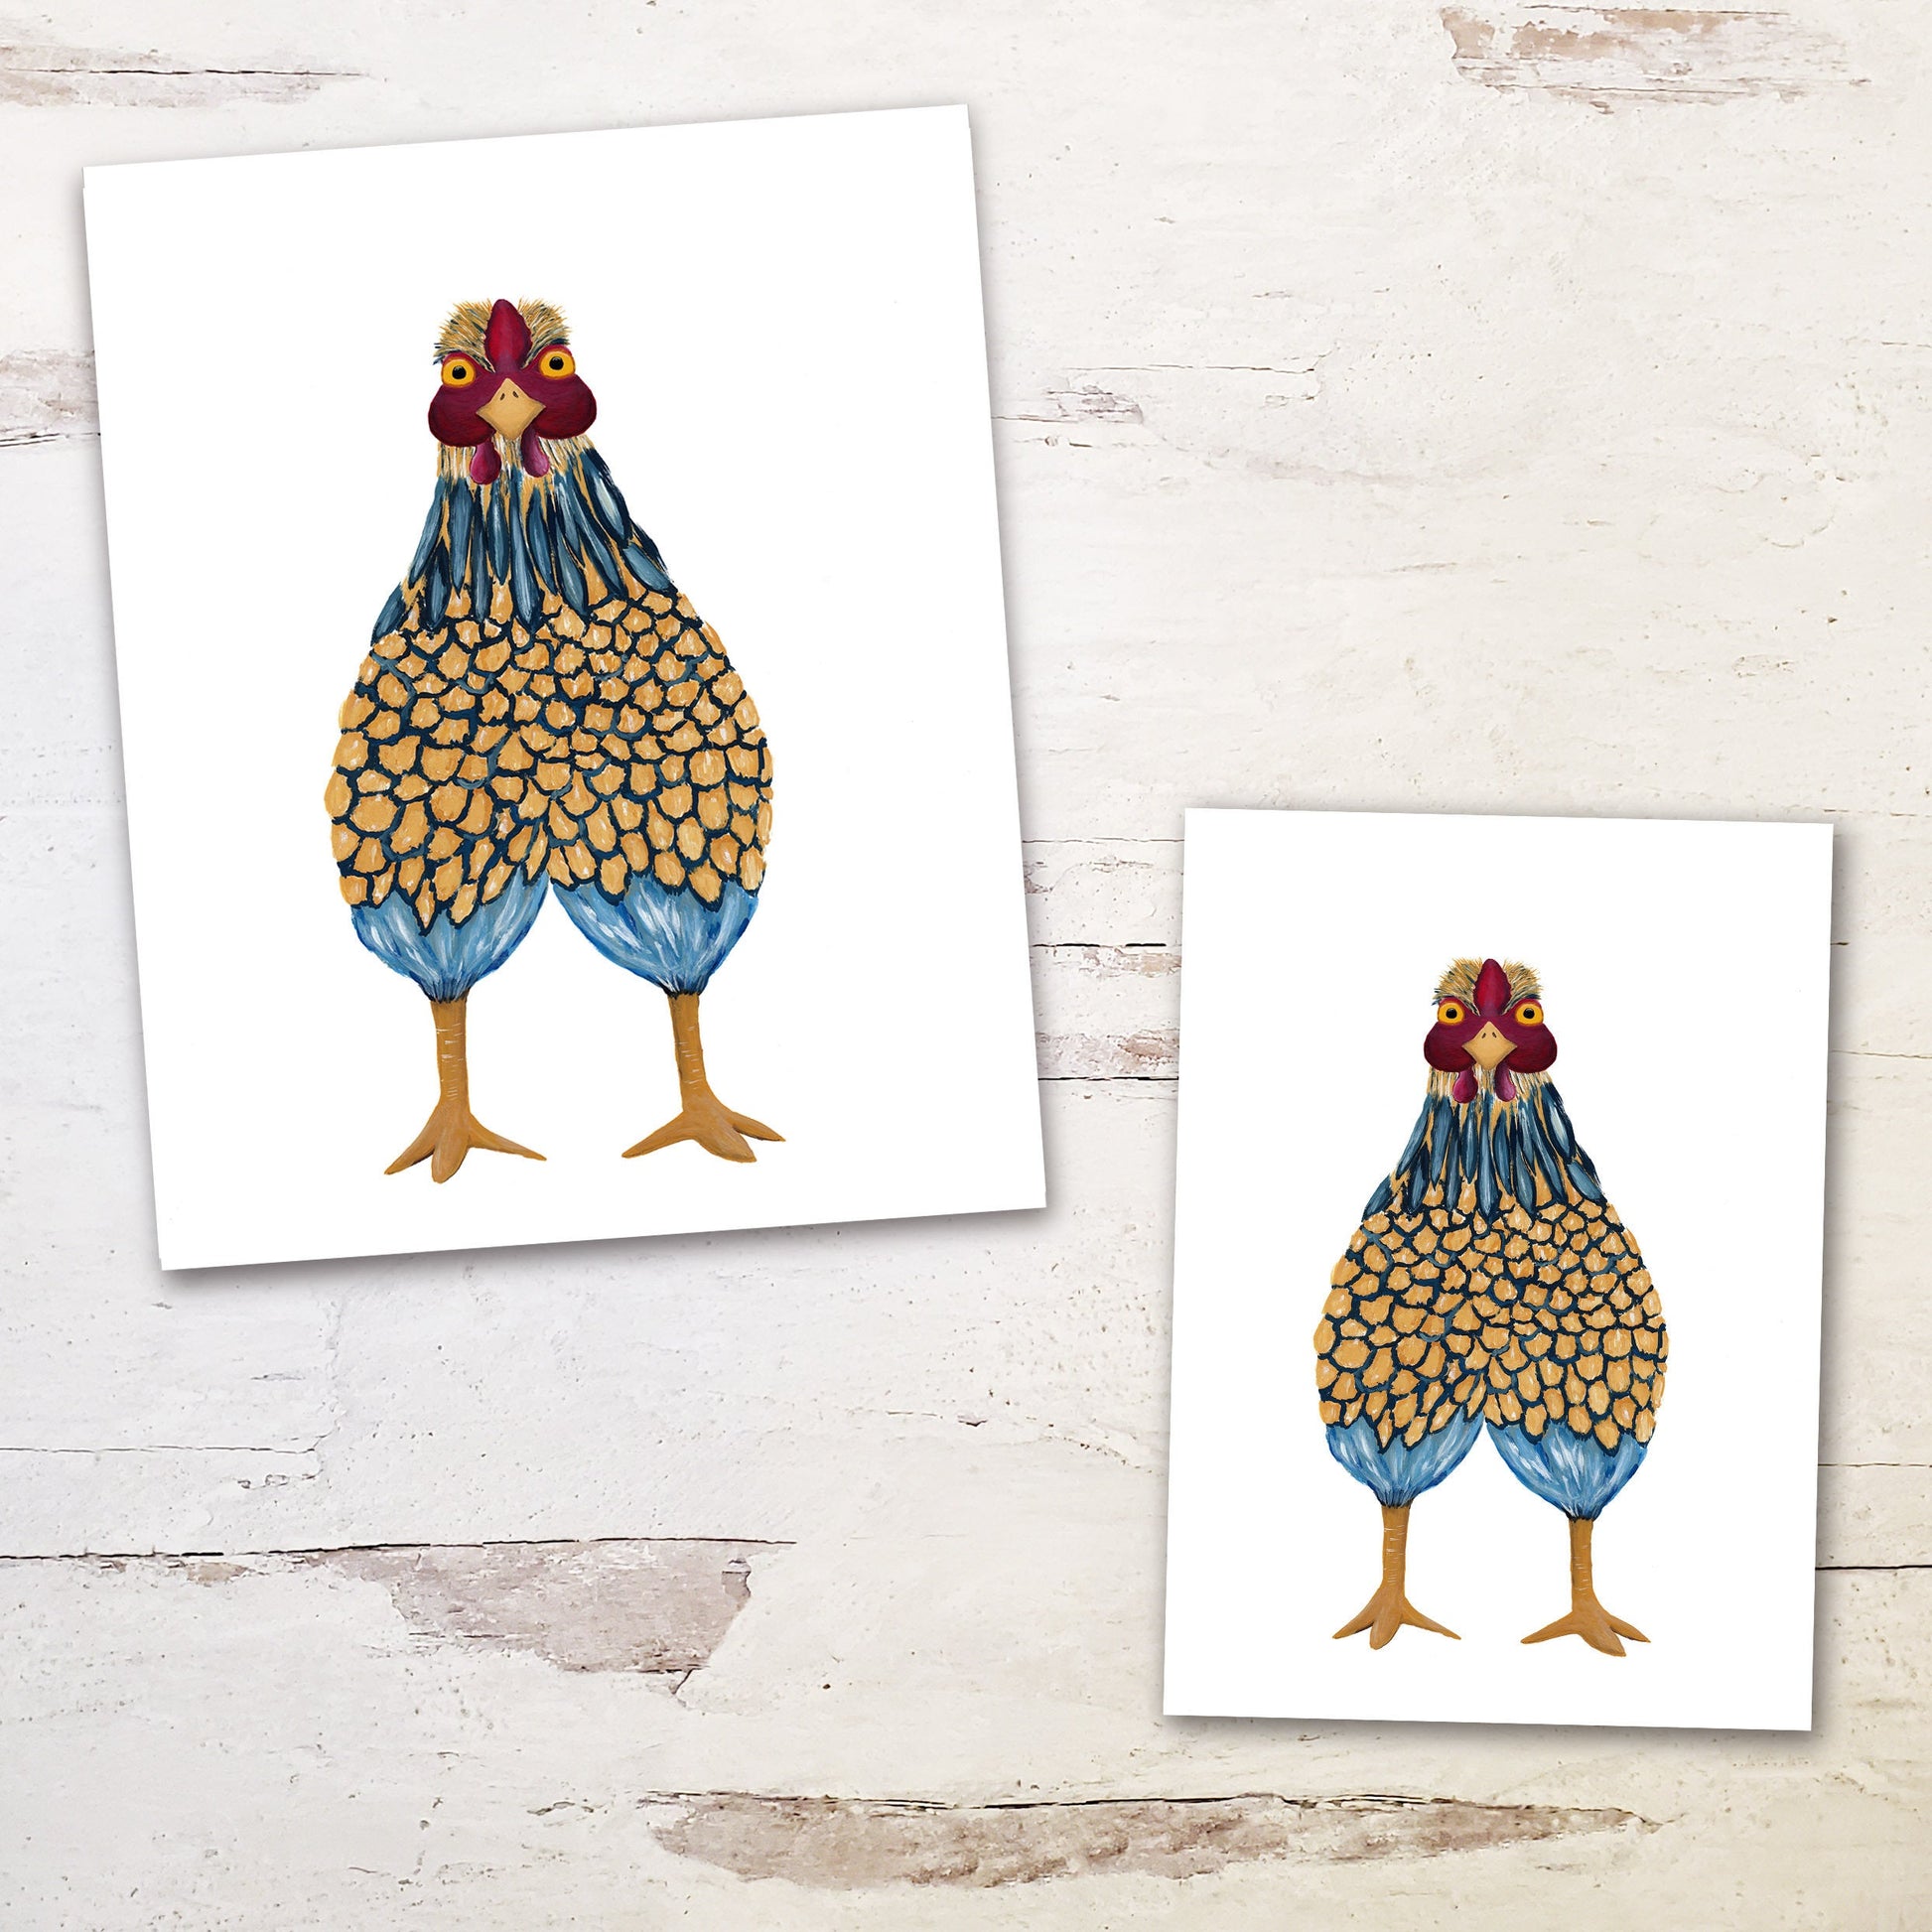 blue chicken print comes in sizes 5 by 7 and 8 by 10